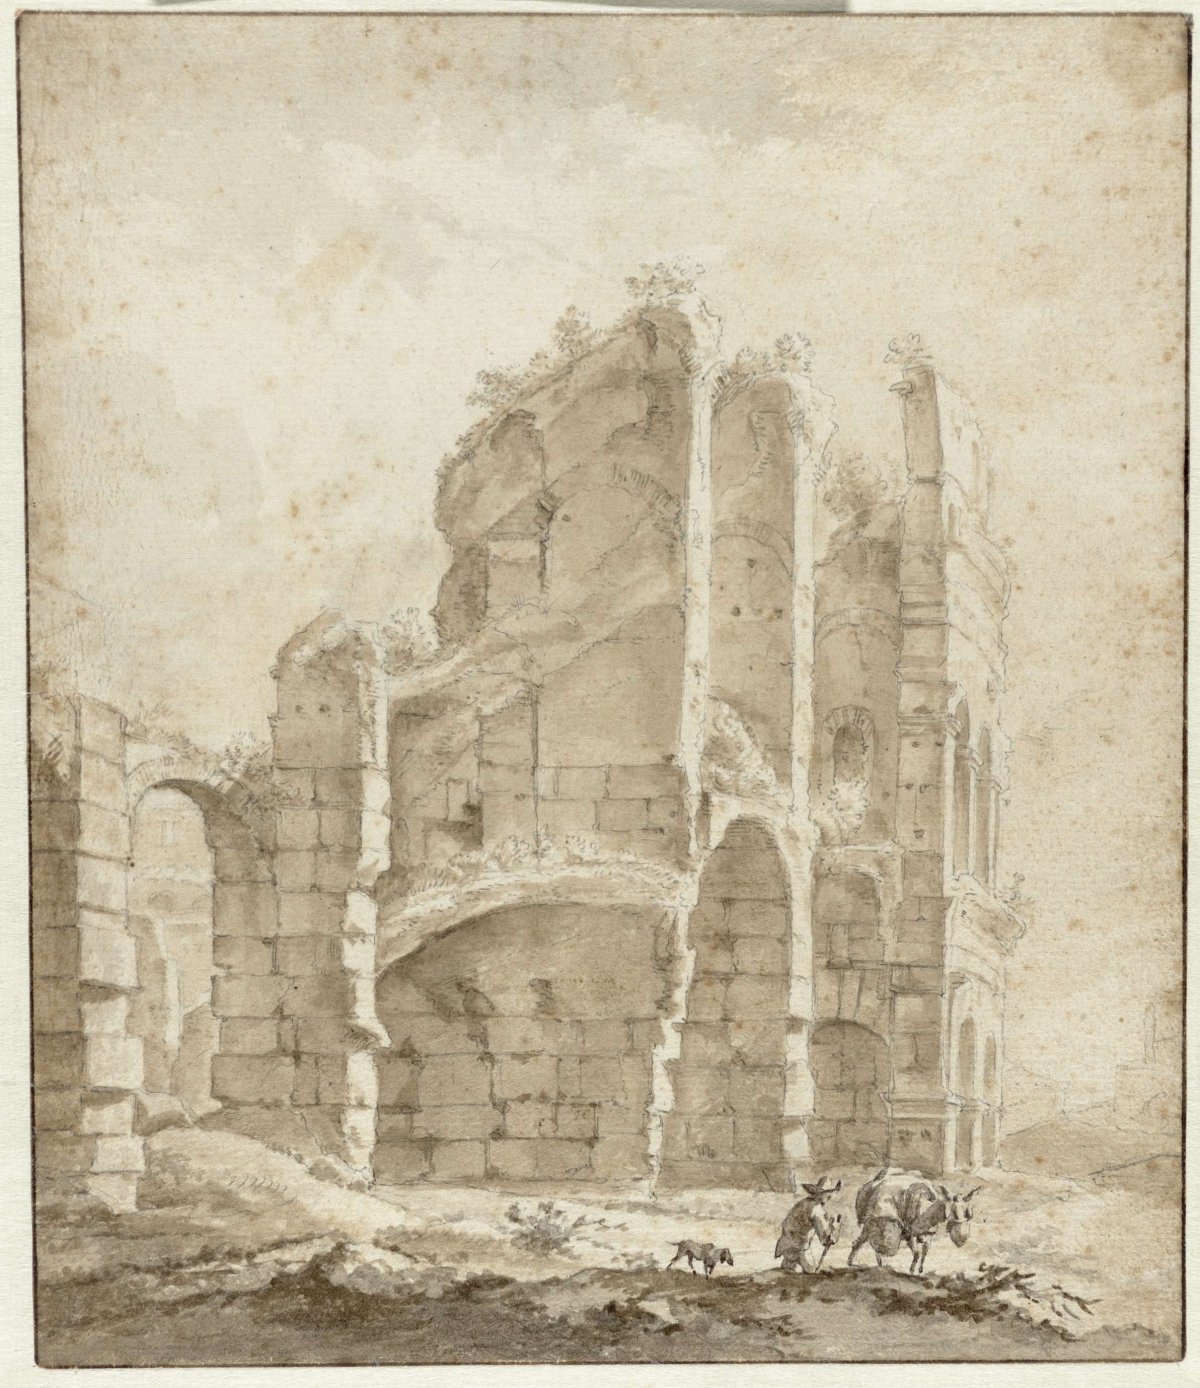 Portion of the Colosseum with a donkey driver, Jan Asselijn, 1635 - 1646